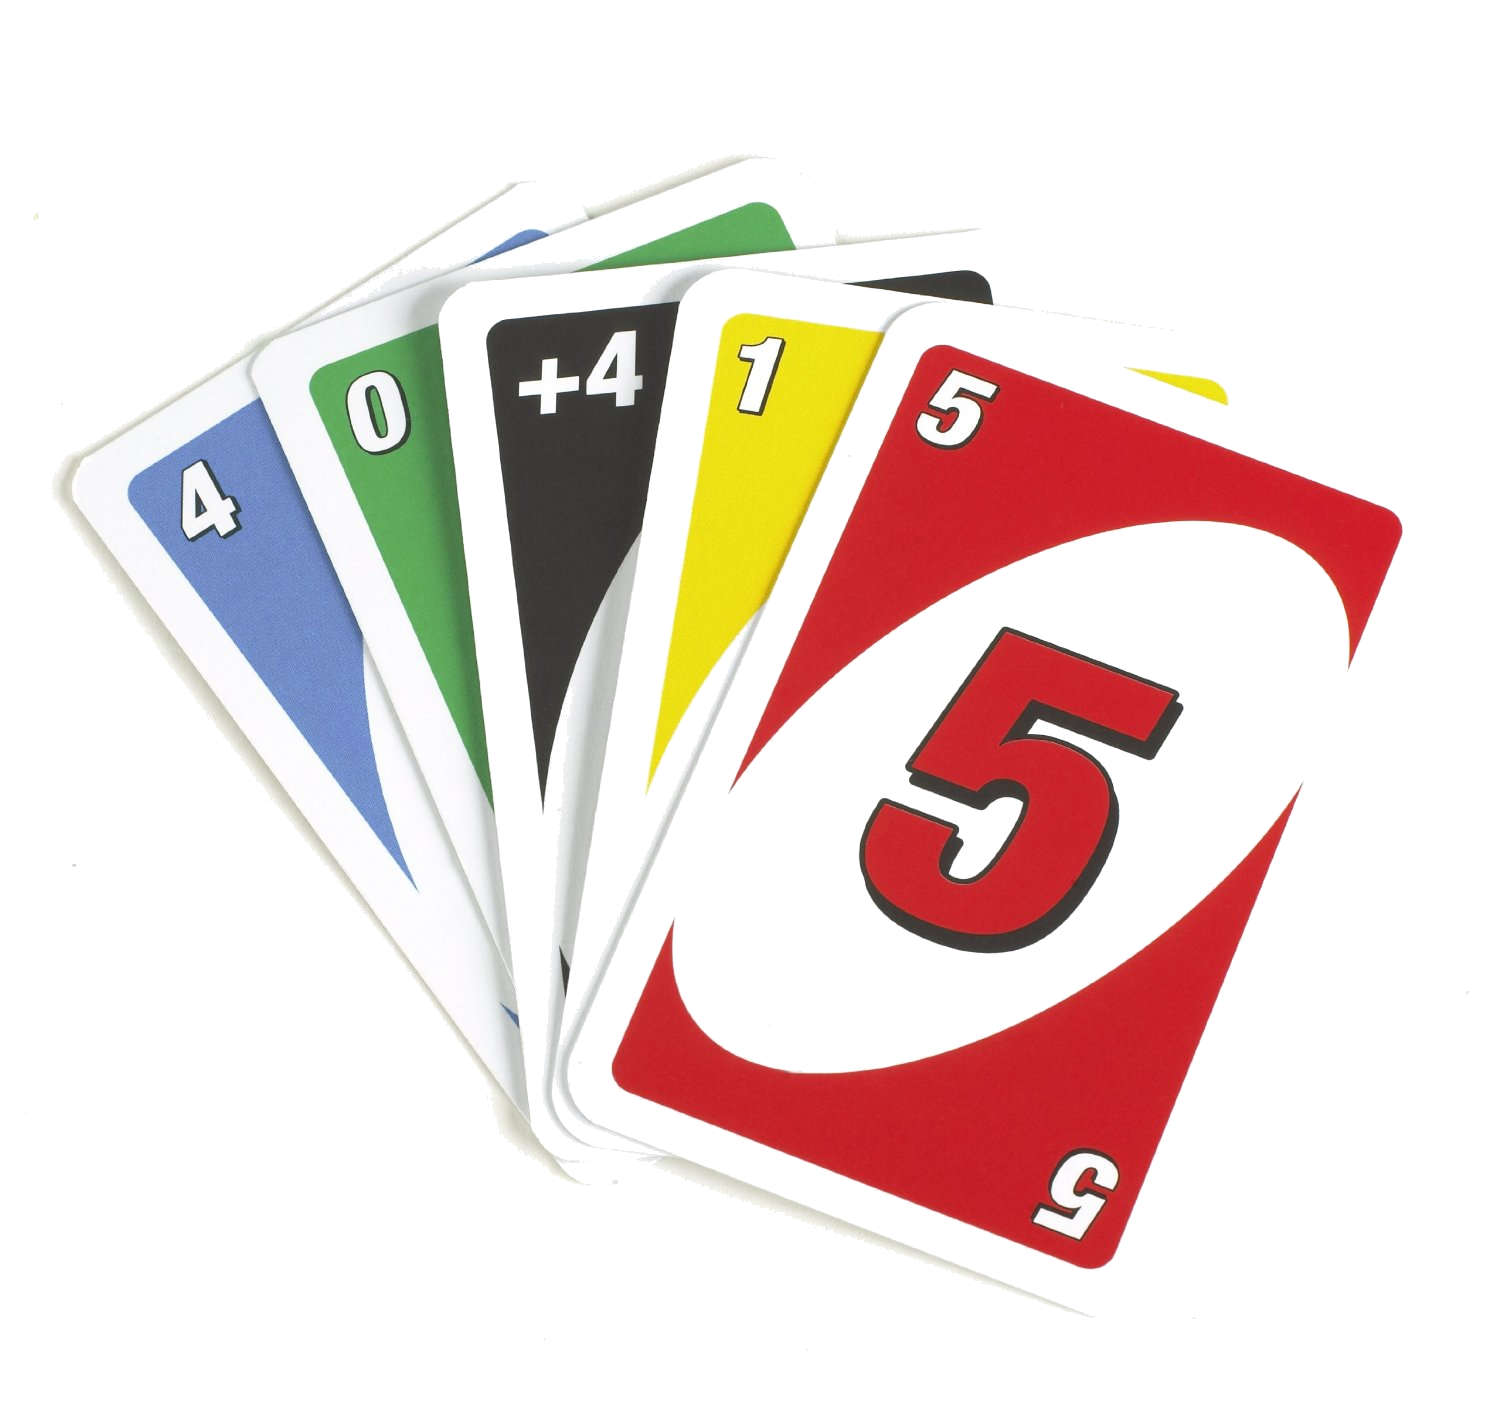 free downloads Uno Online: 4 Colors